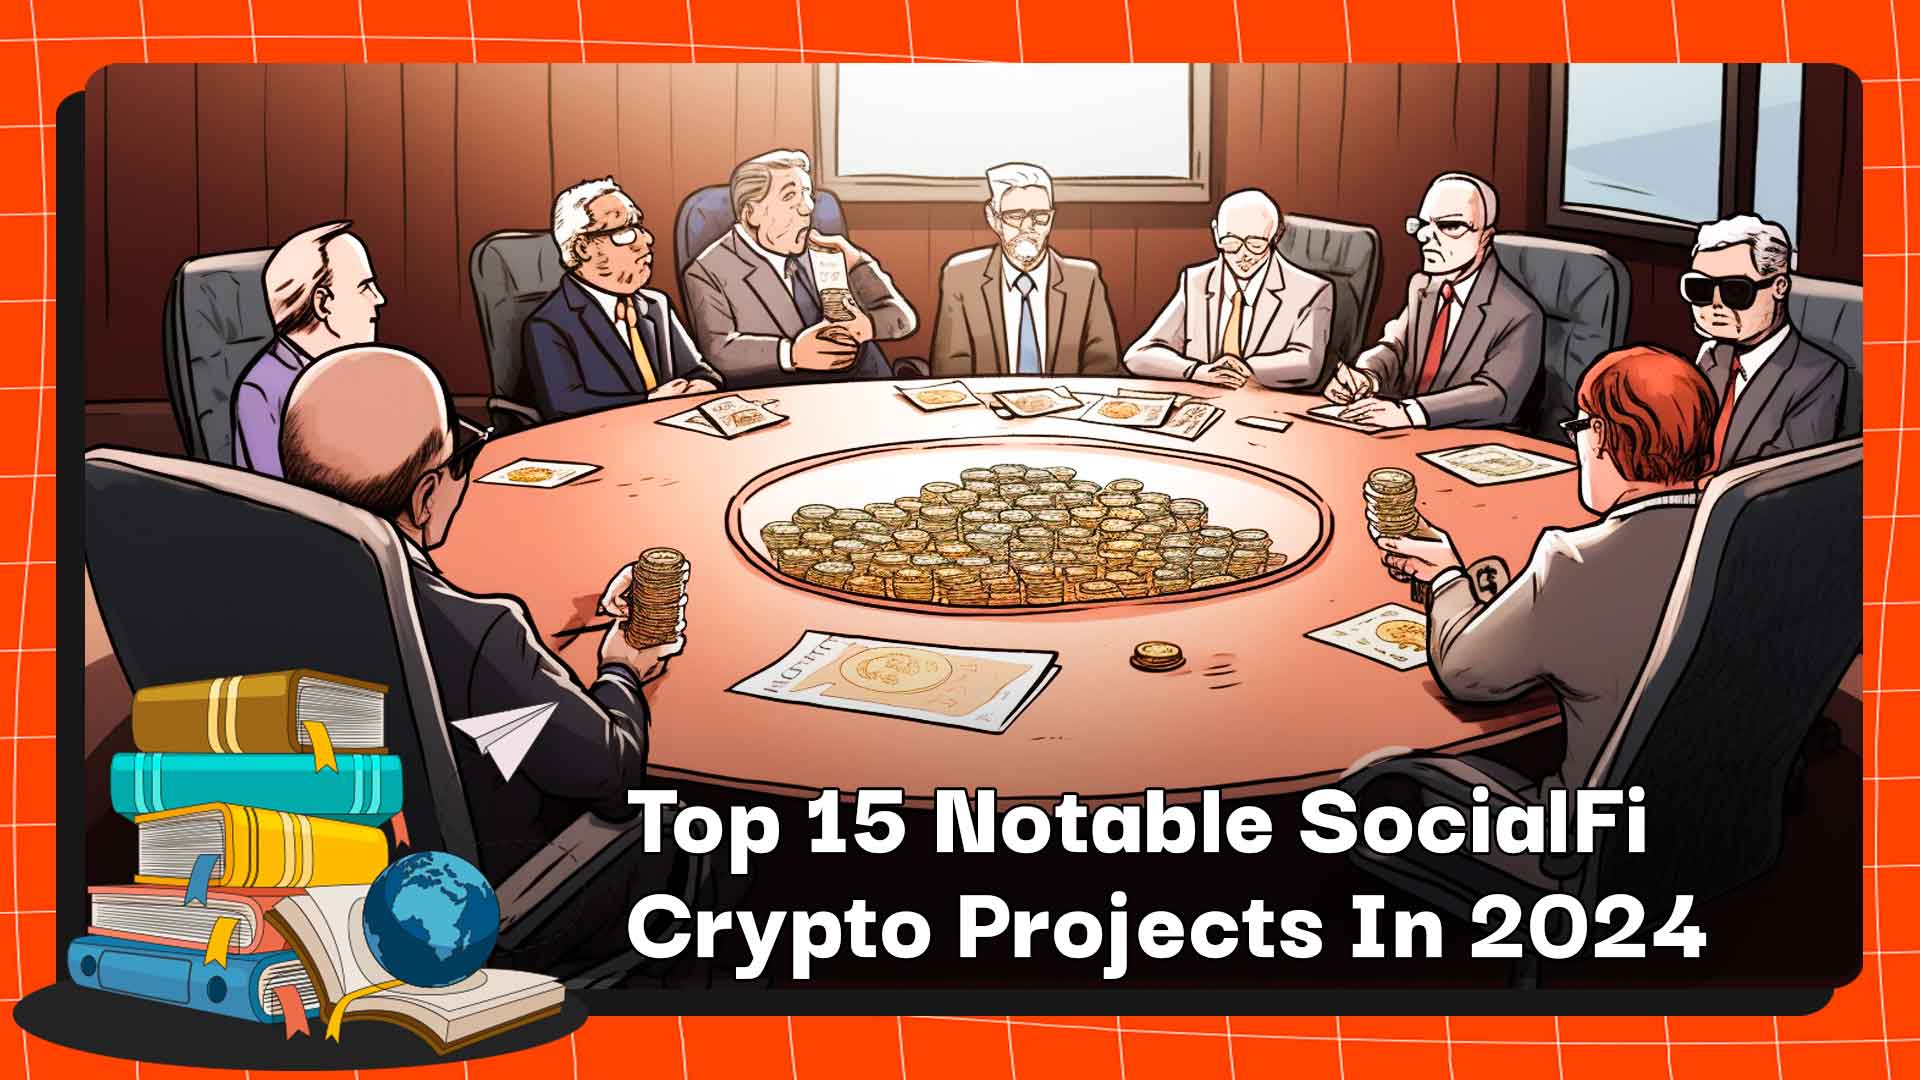 Top 15 Notable SocialFi Crypto Projects In 2024